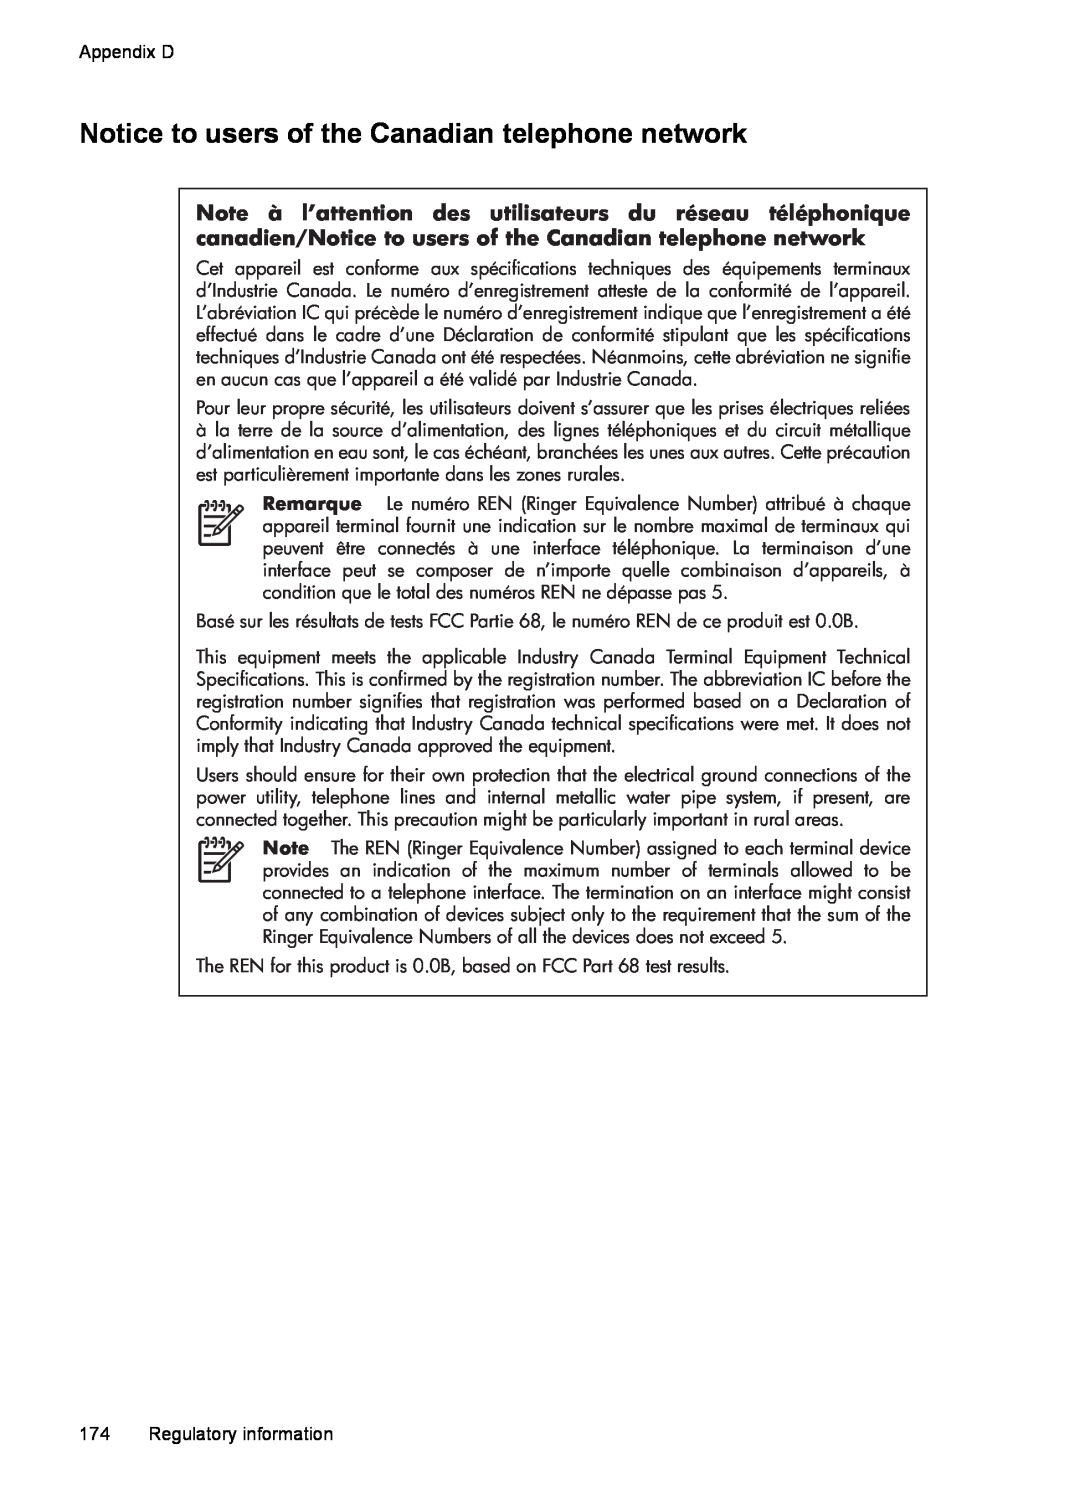 HP J4540, J4680, J4660, J4580, J4550 manual Notice to users of the Canadian telephone network 